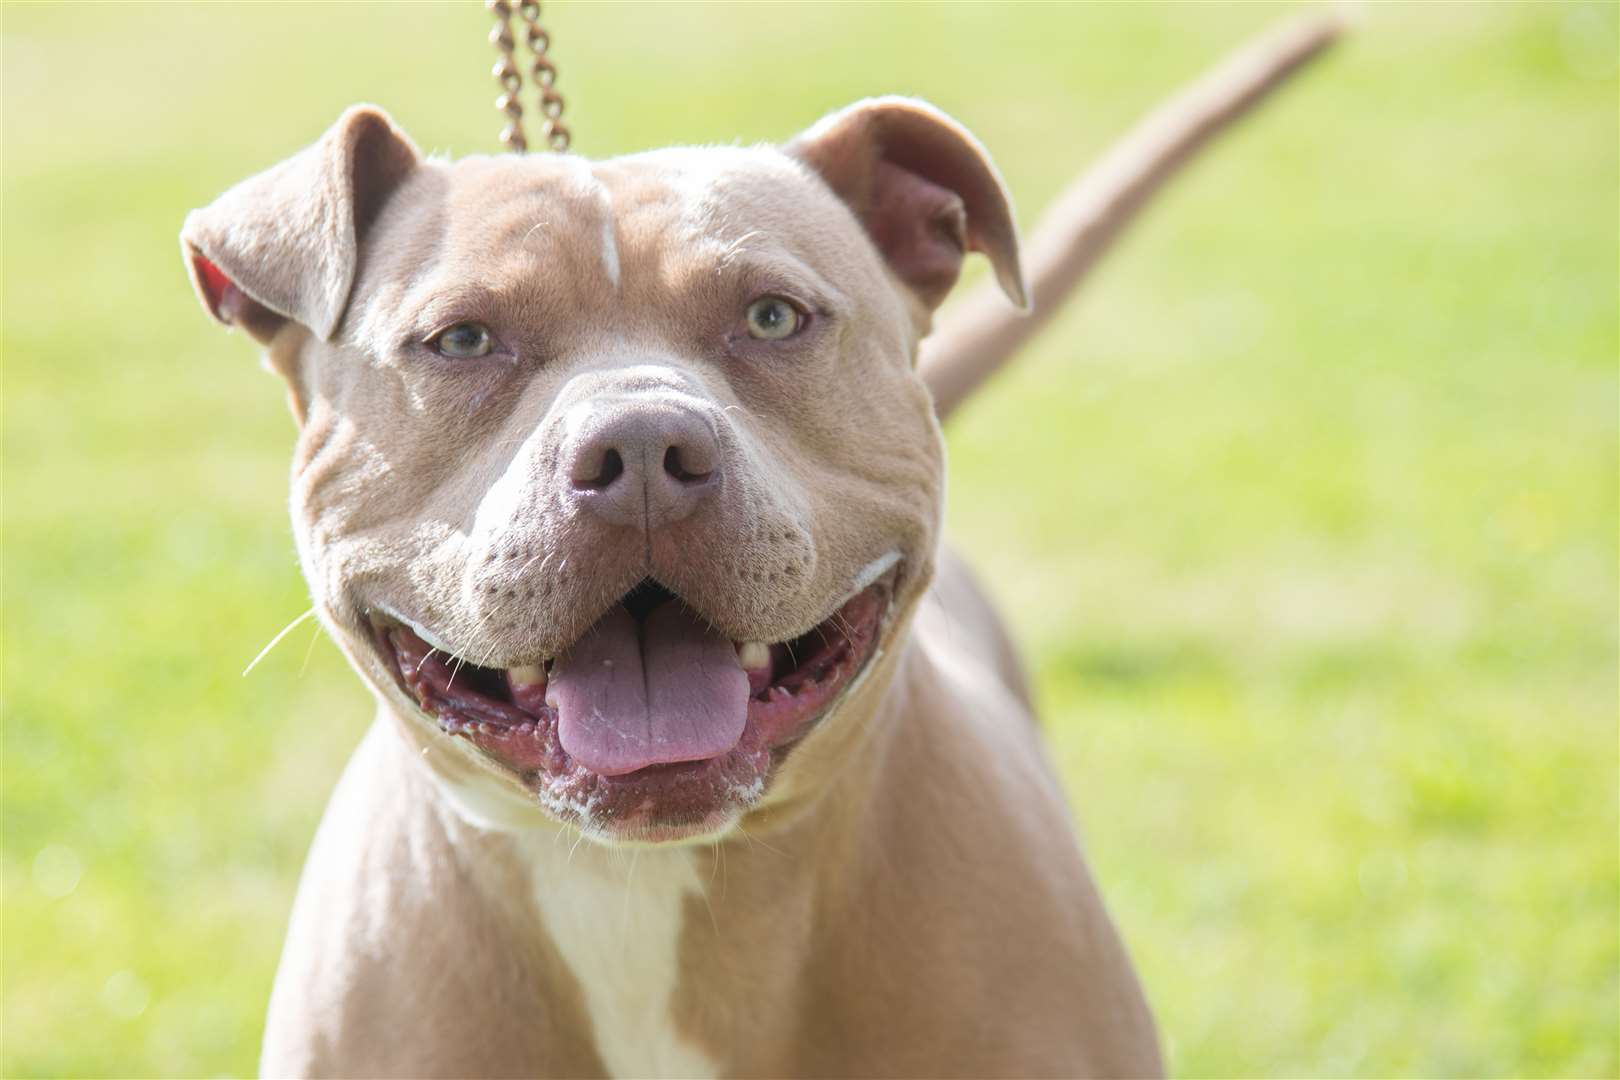 Ghost, an American Bully XL, is four years old. Picture: Daniel Forsyth